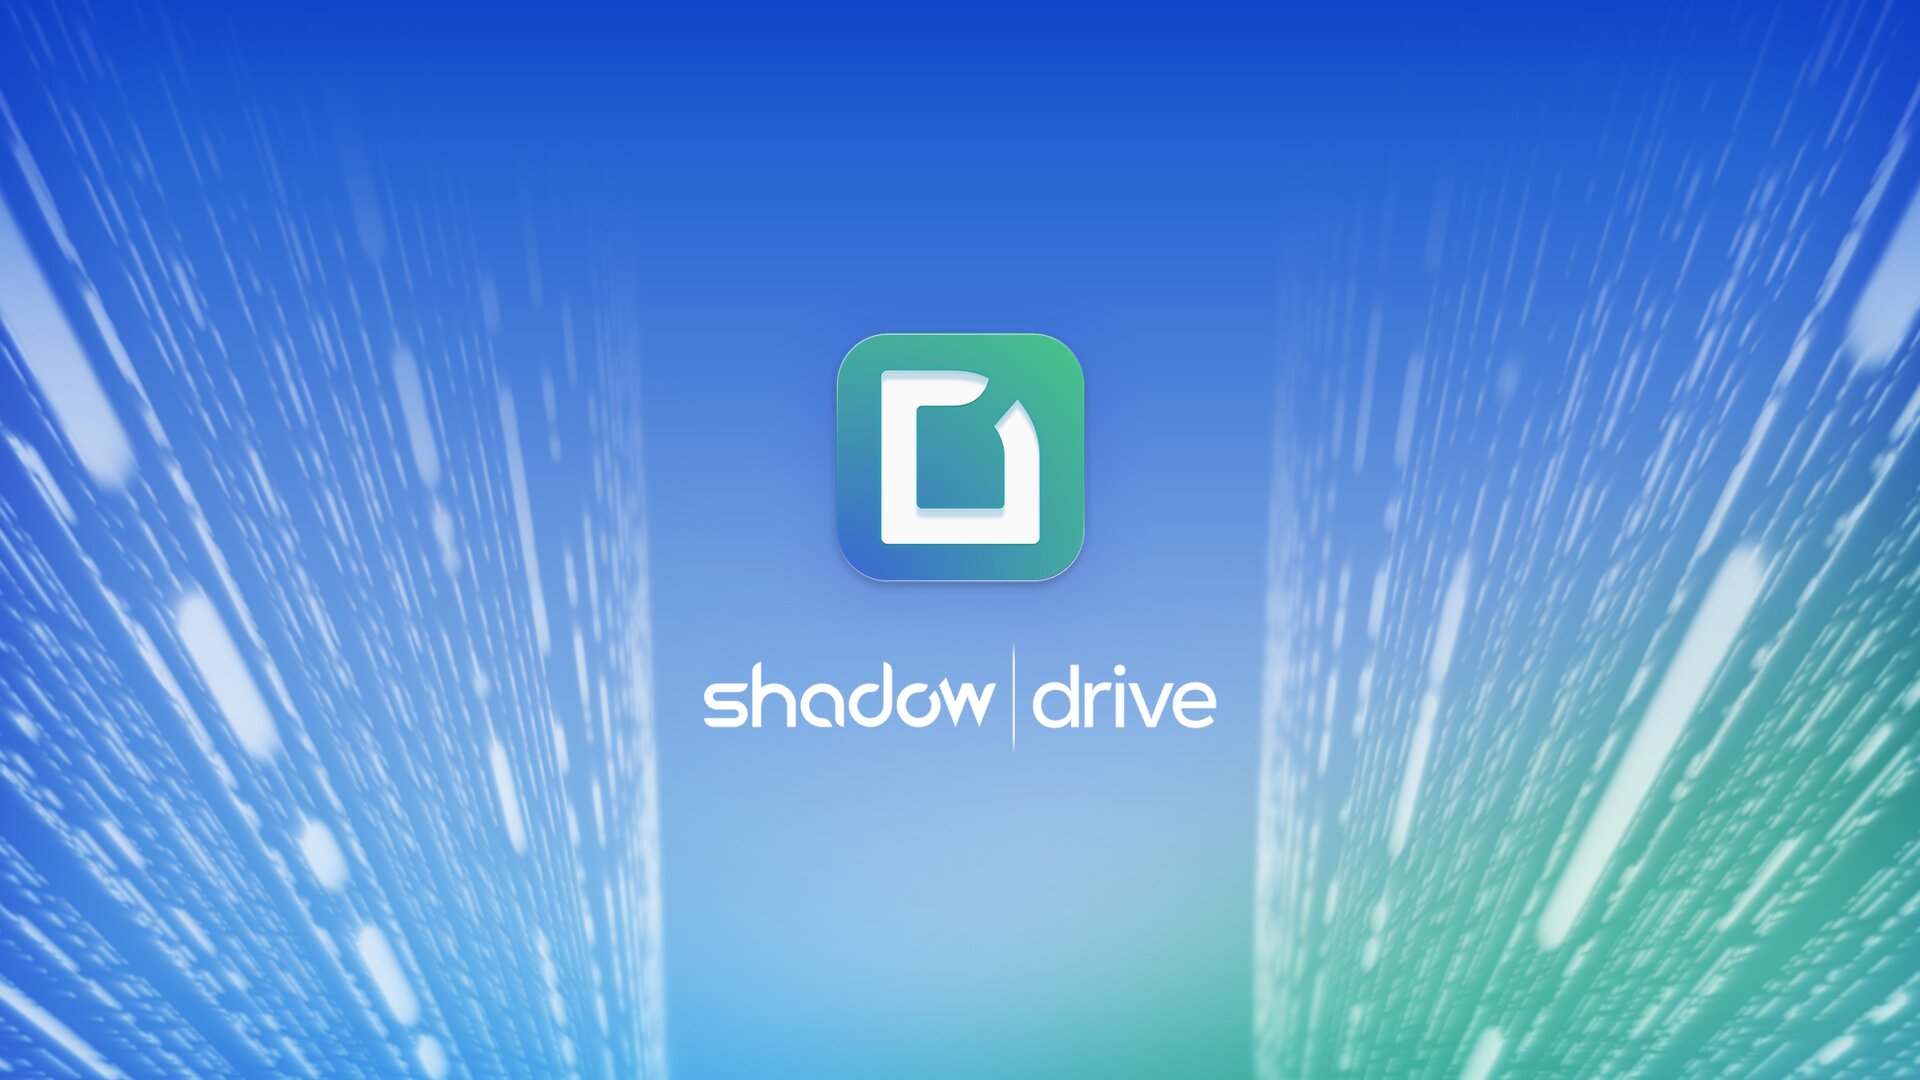 Shadow Drive: Secure Cloud Storage Launches This Fall